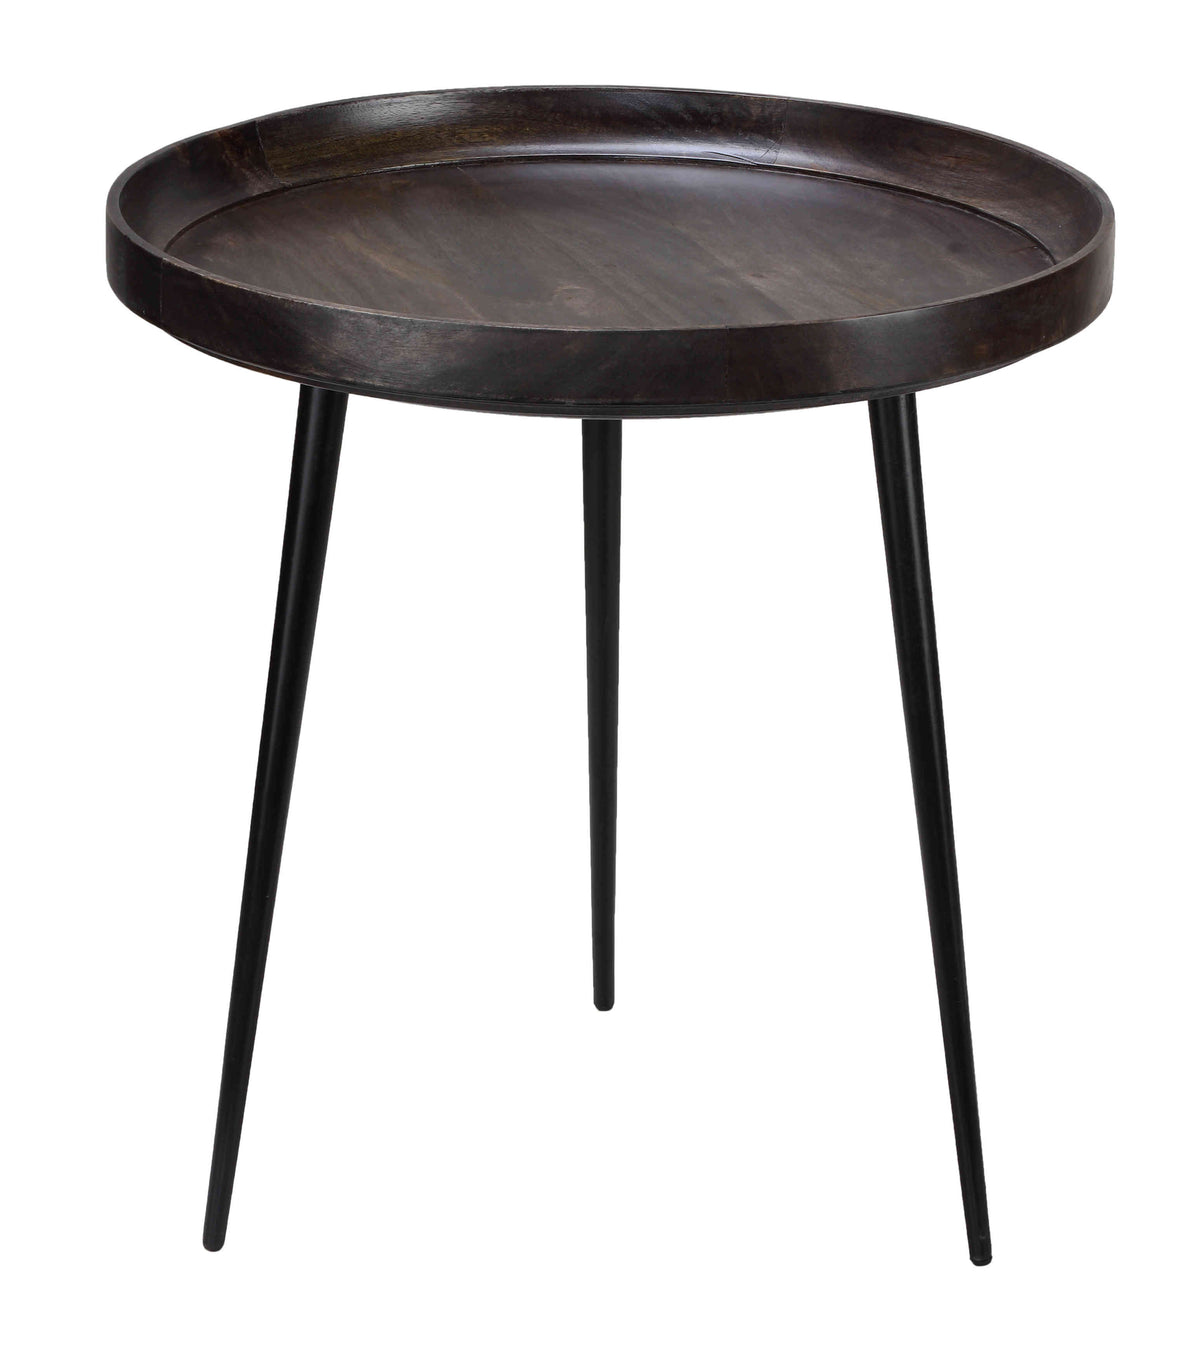 Bare Decor Bryce Wooden End Table